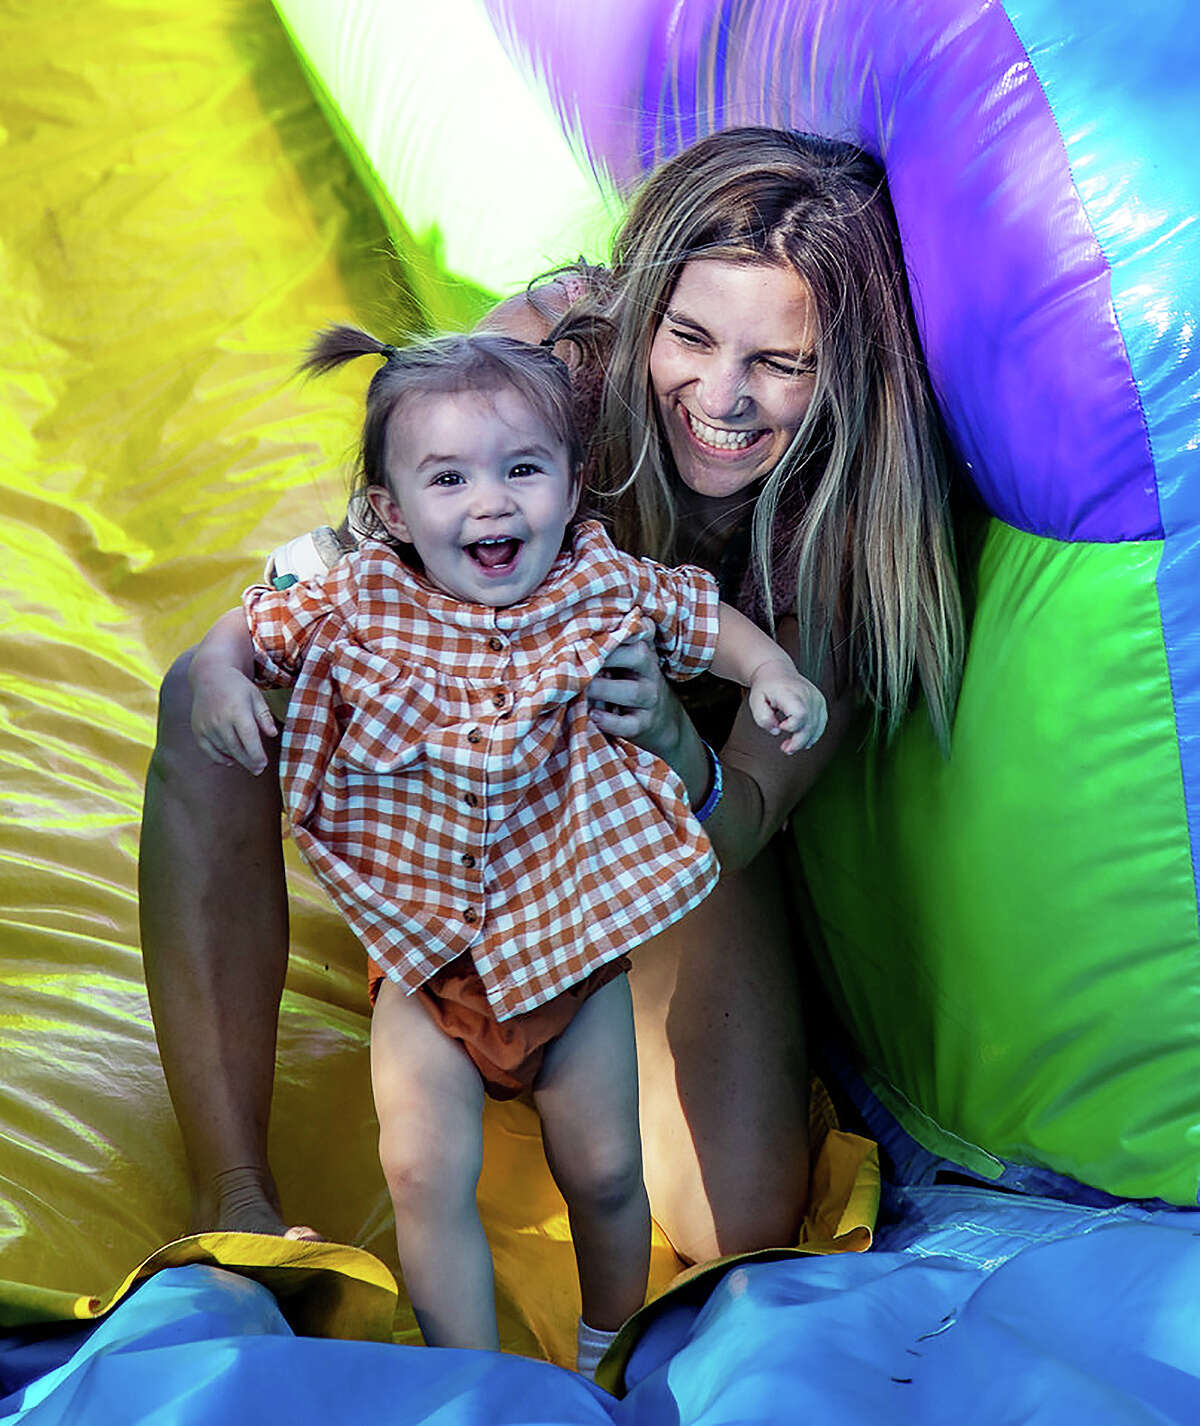 Kids and parents alike enjoy the inflatable slides and bouncy houses provided for their entertainment at The Kingwood Oktoberfest.